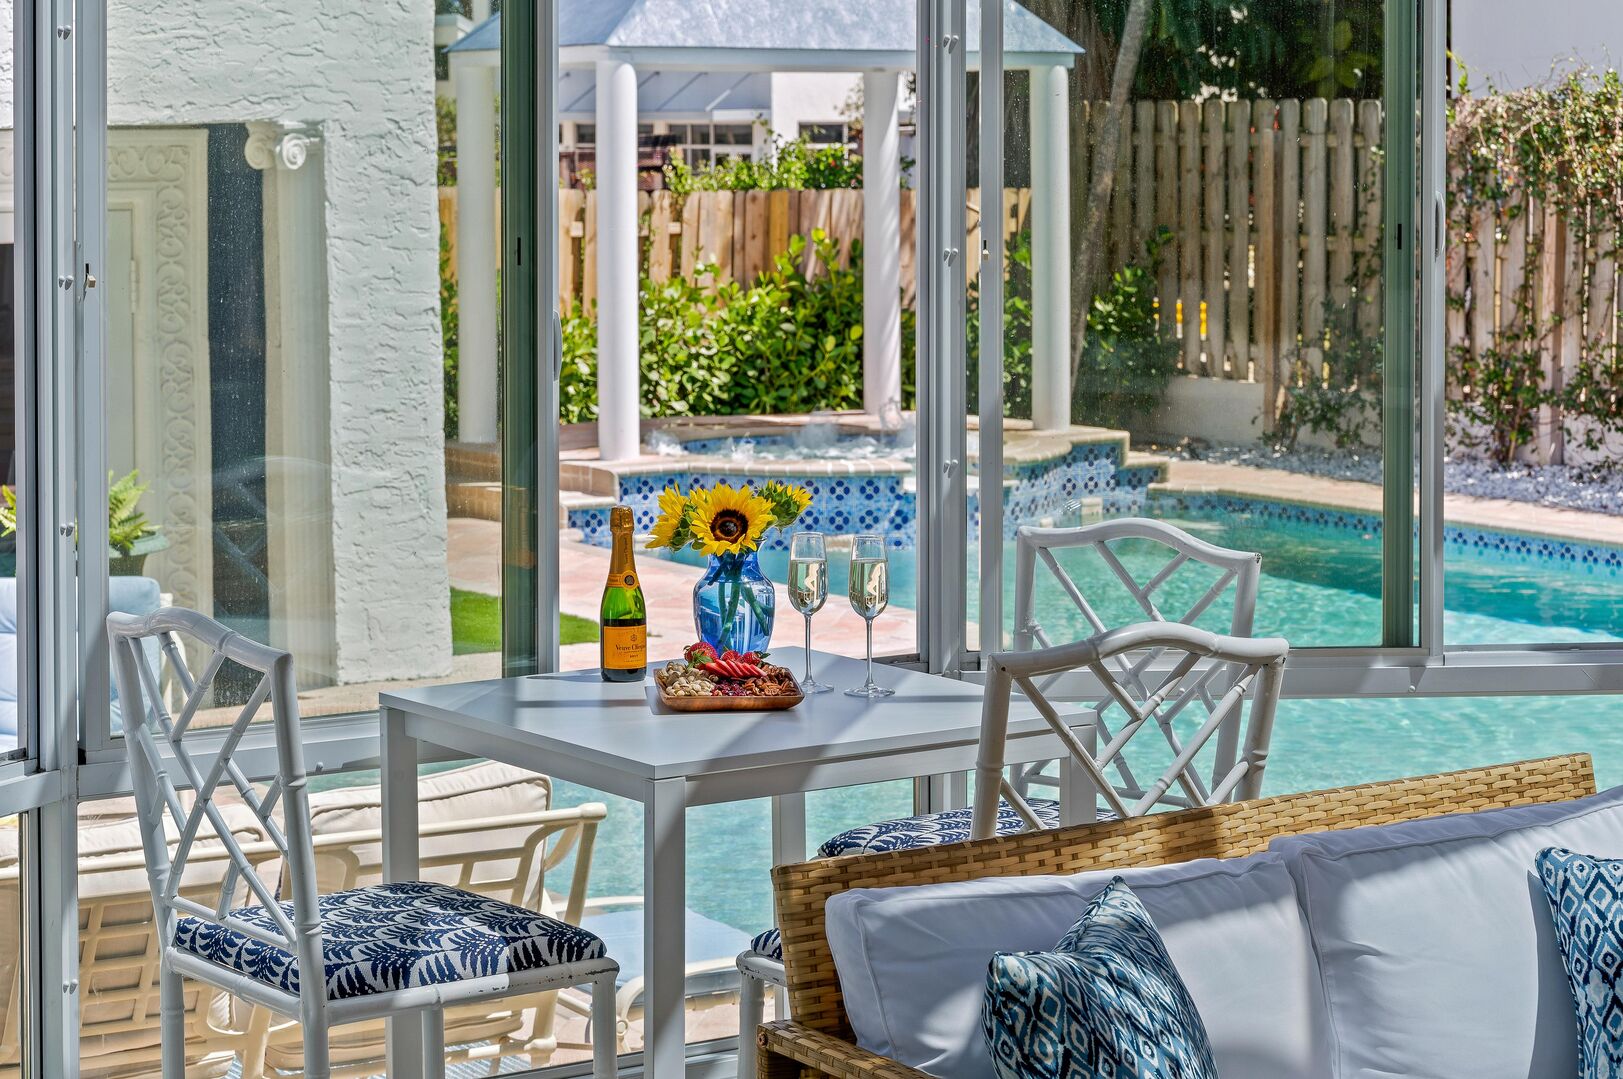 Sunlit Serenity: Where our sunroom's inviting seating beckons you to relax and enjoy poolside paradise.